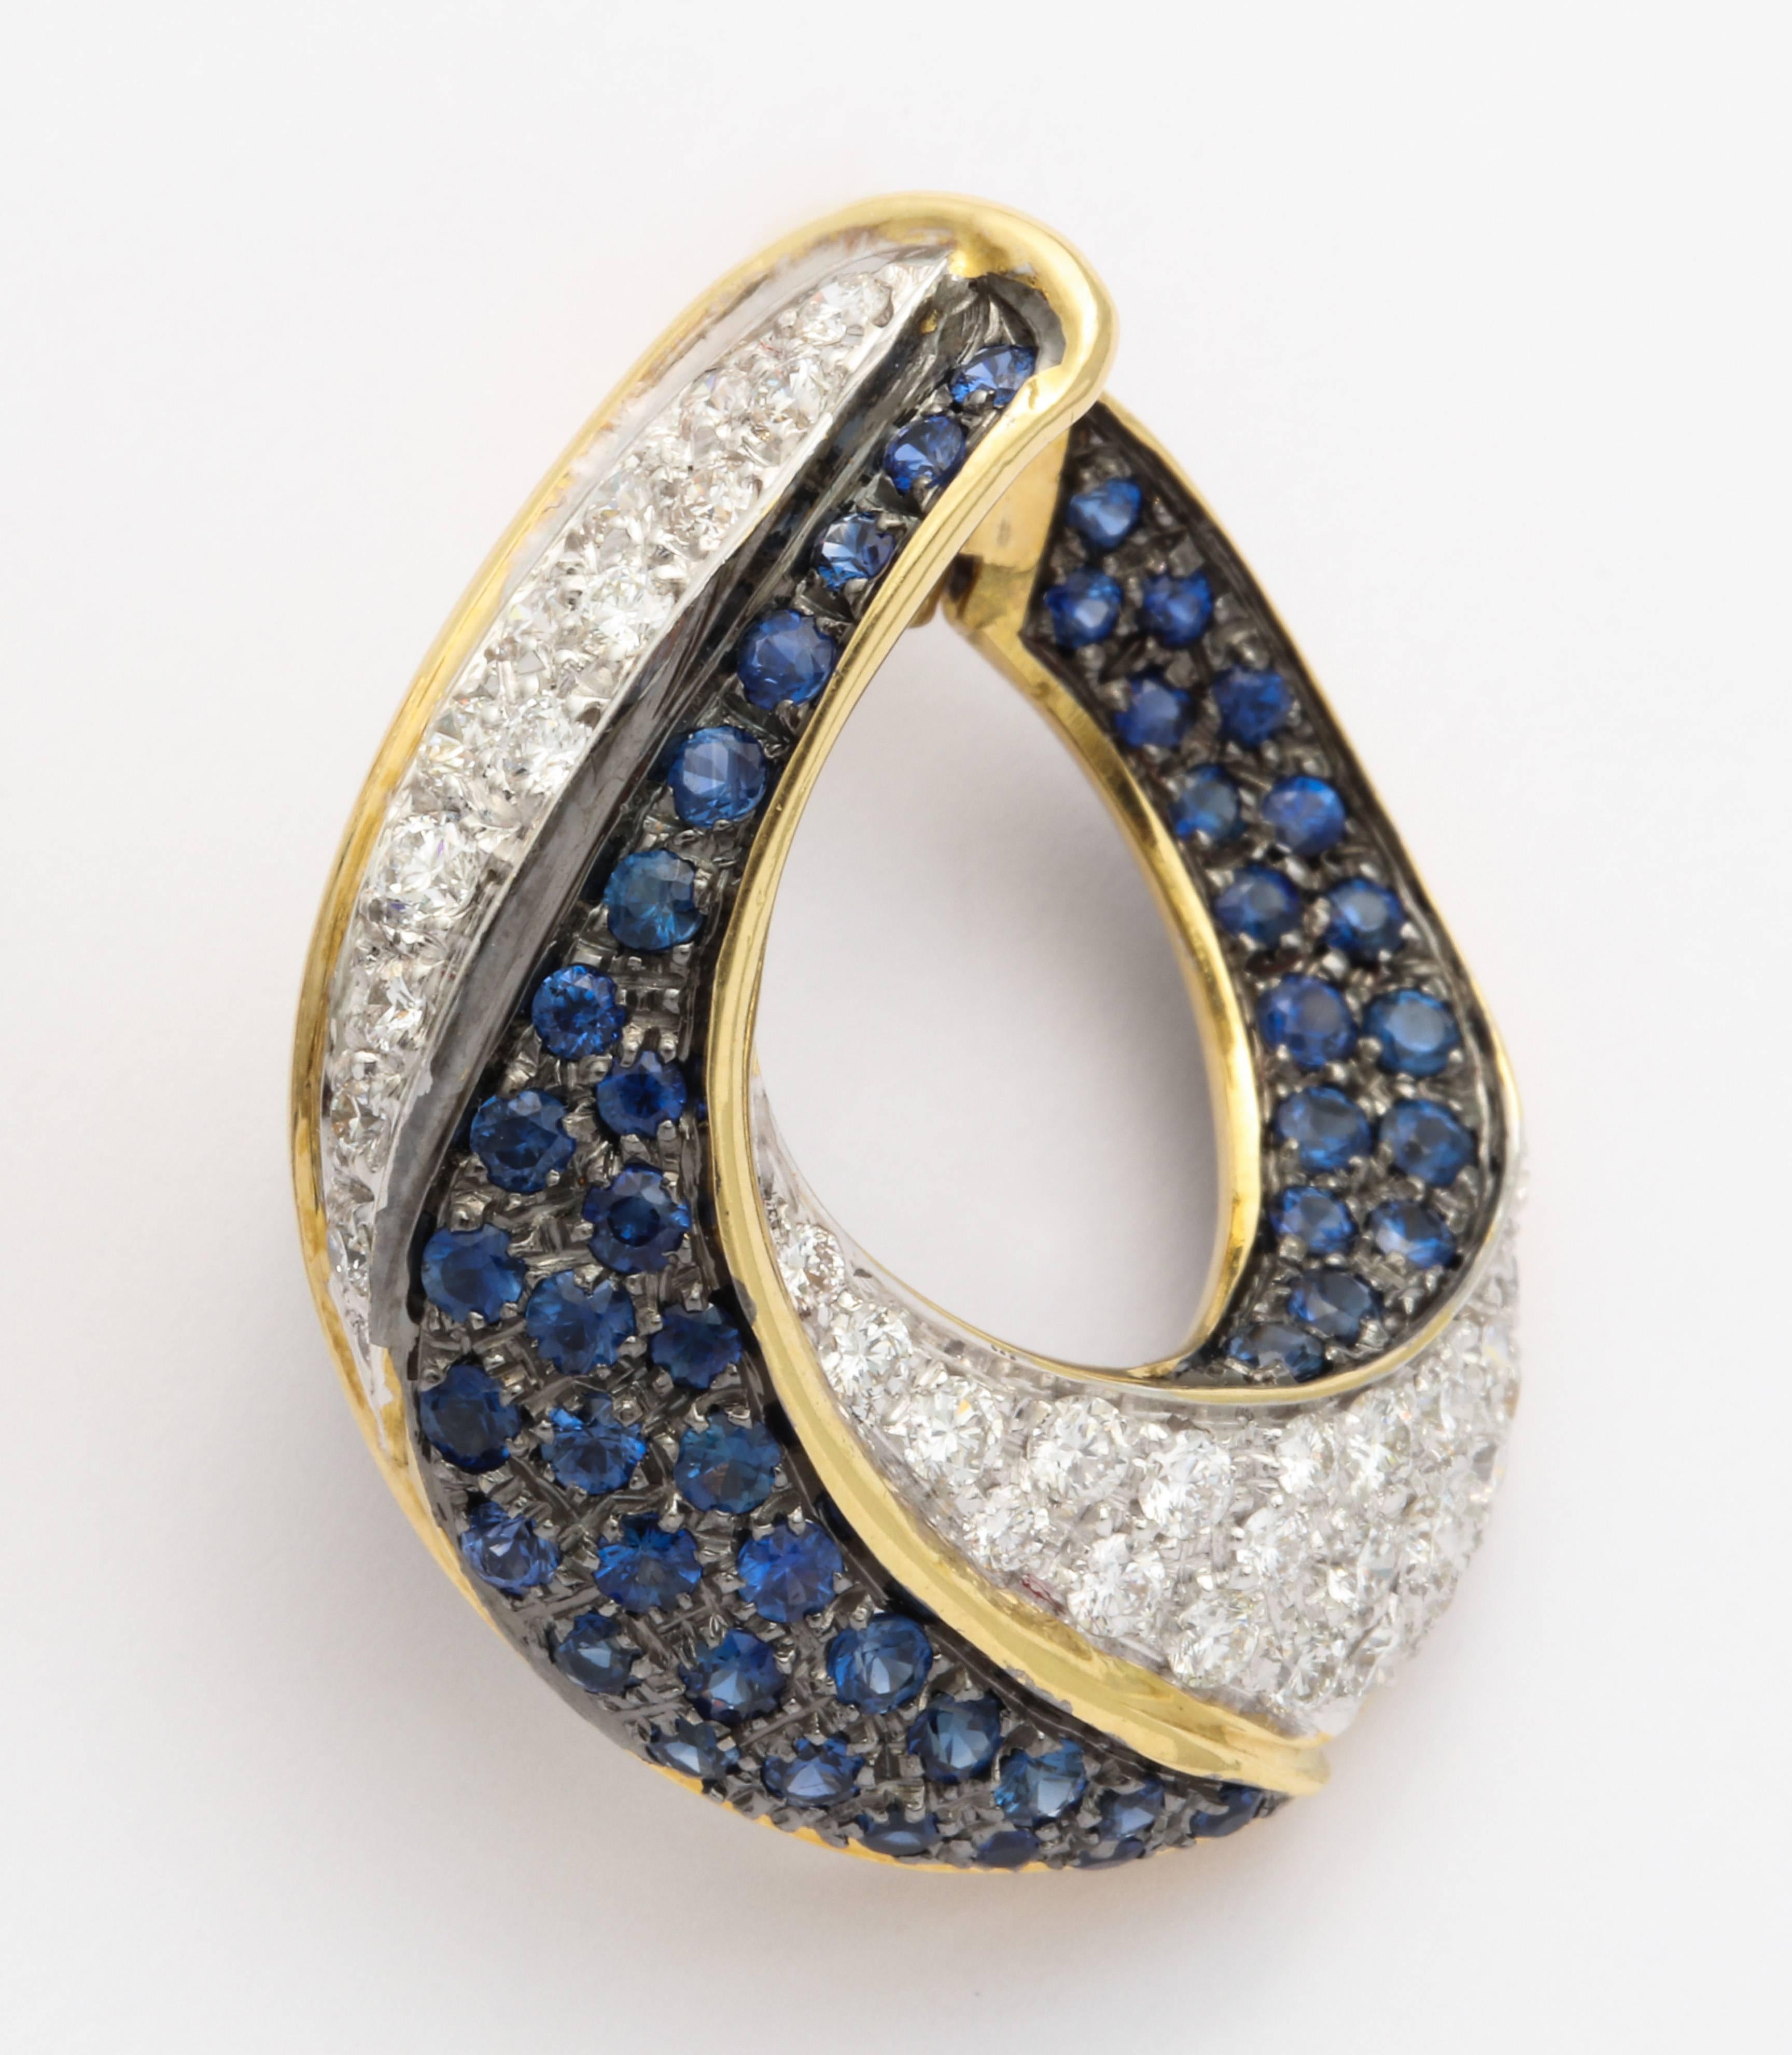 Sleek and stylish as only the Italians know how to do it, these earrings are sure to brighten up the day- or the evening.  The versatile design allows for these wonderful hoops to be worn casually or for a dressy affair.  The rich blue sapphires are